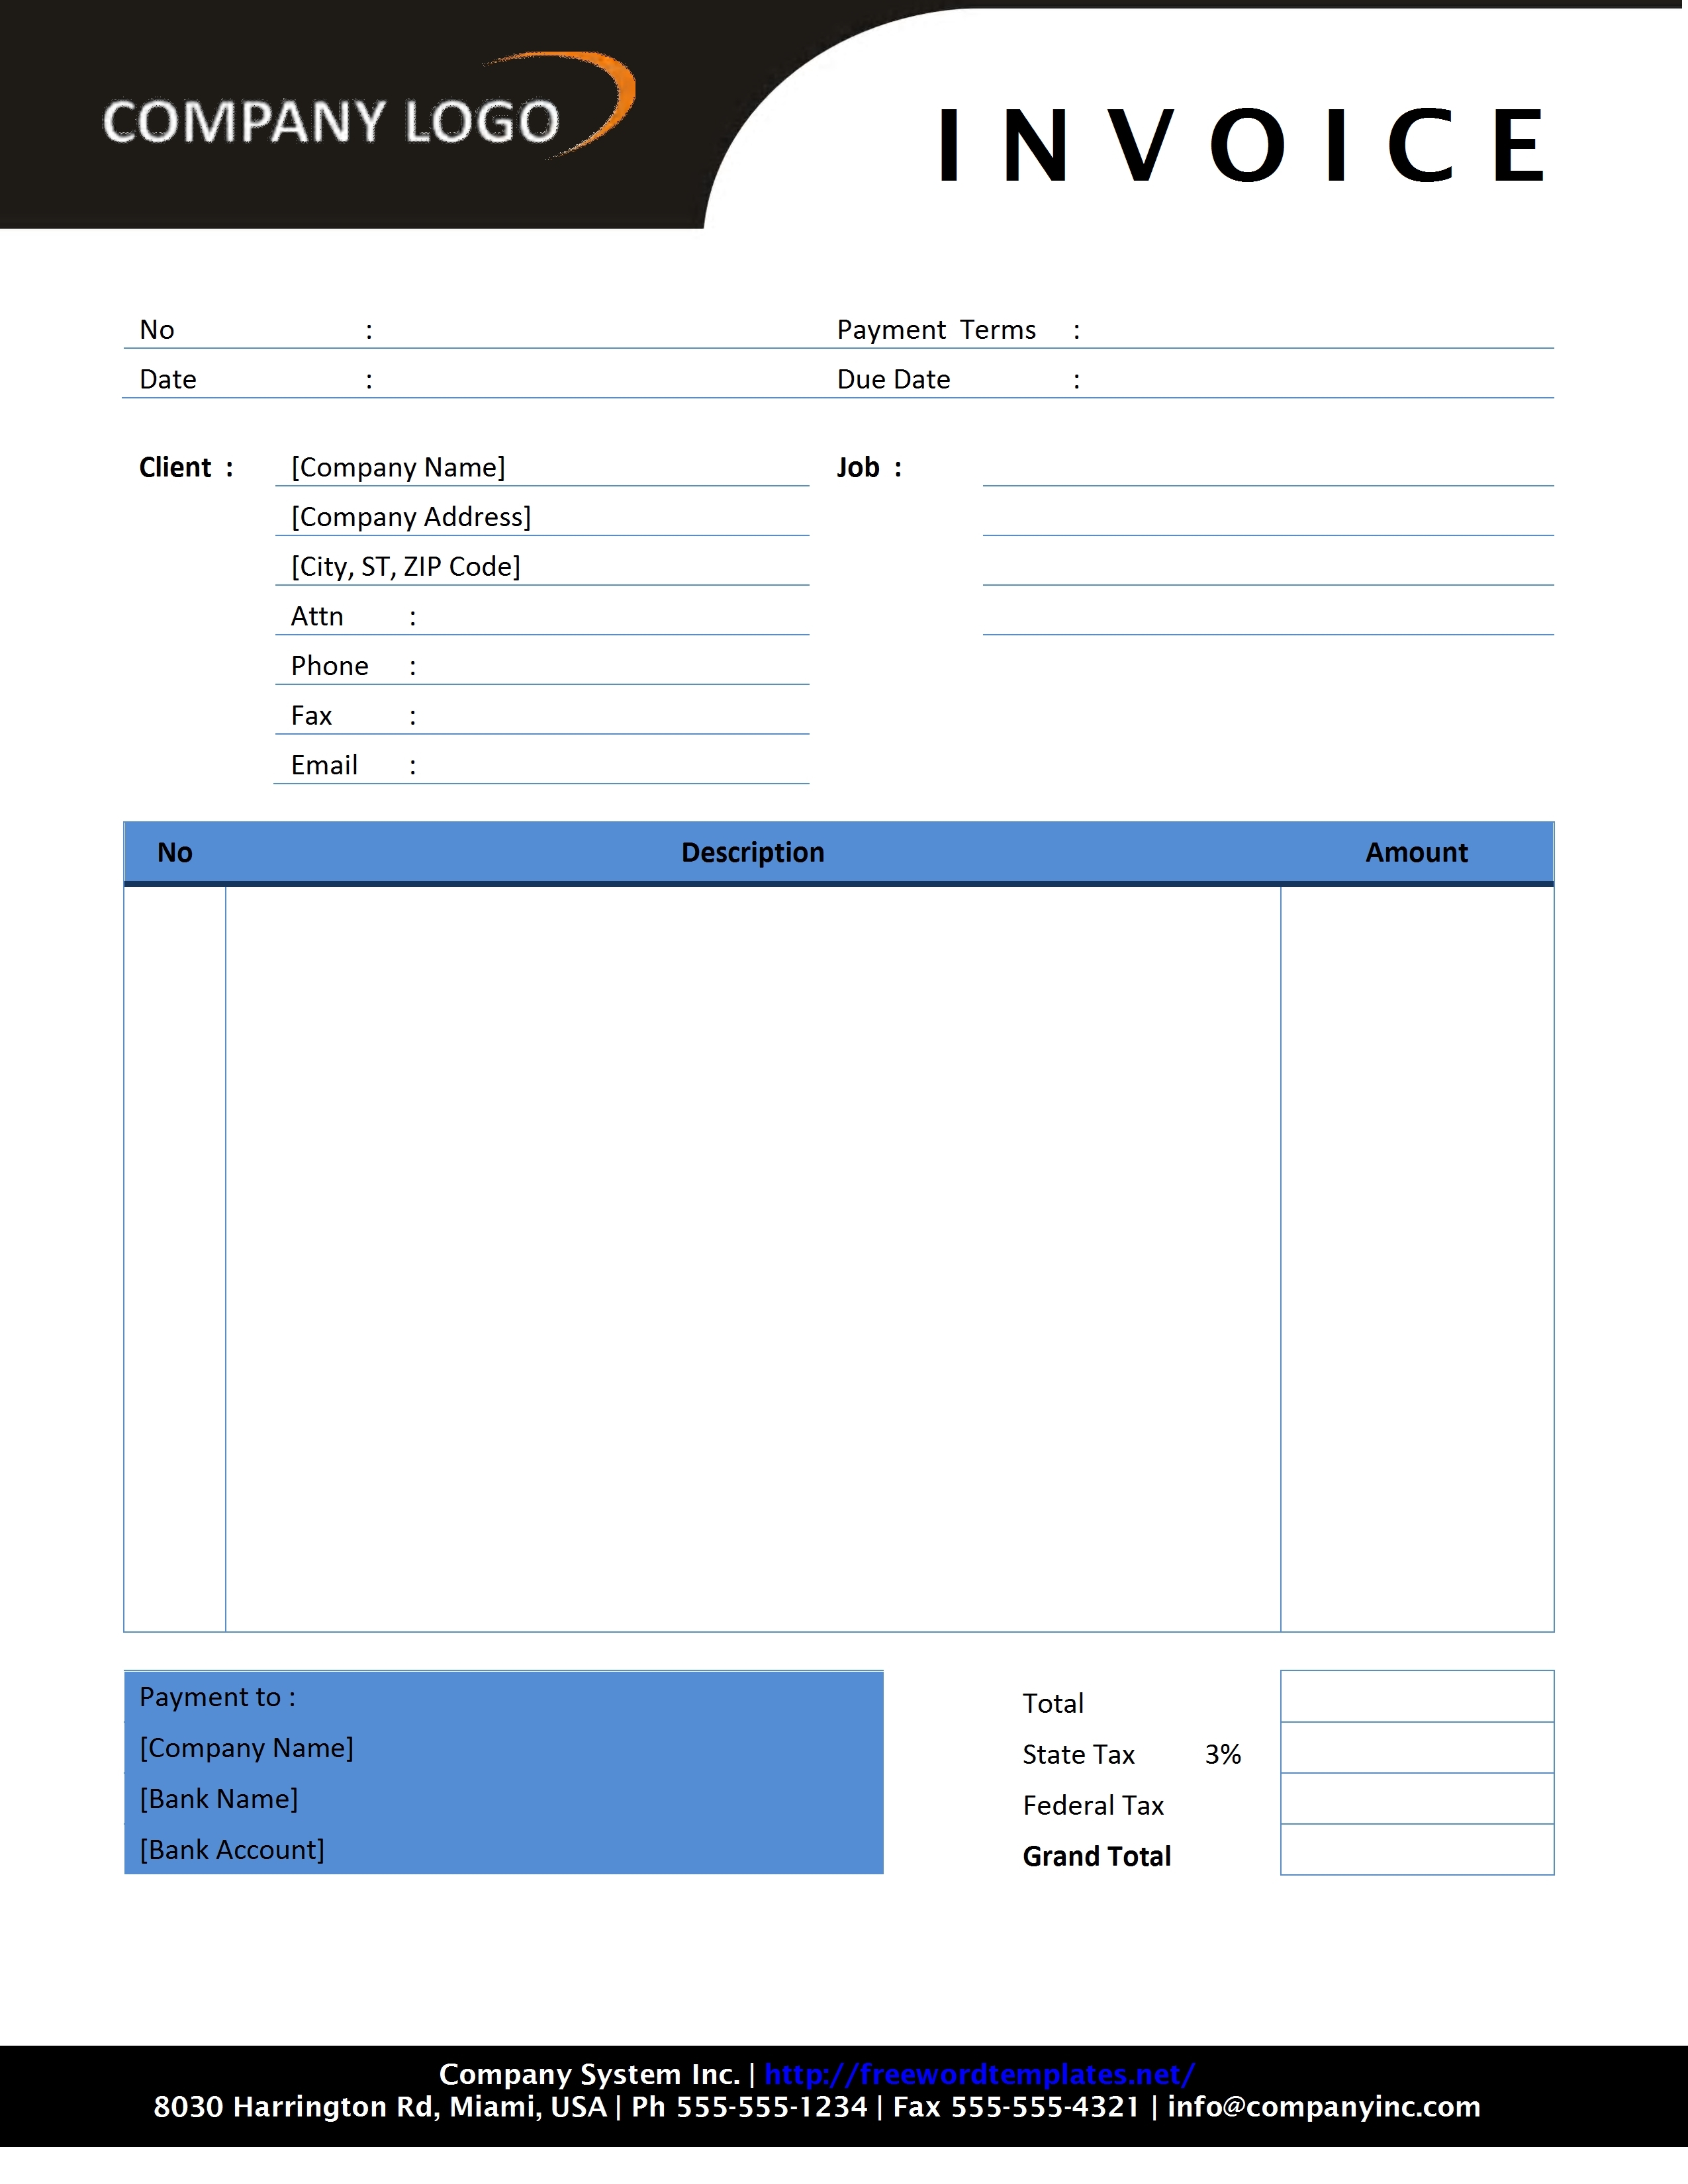 microsoft word invoice template download best business template word invoice template download